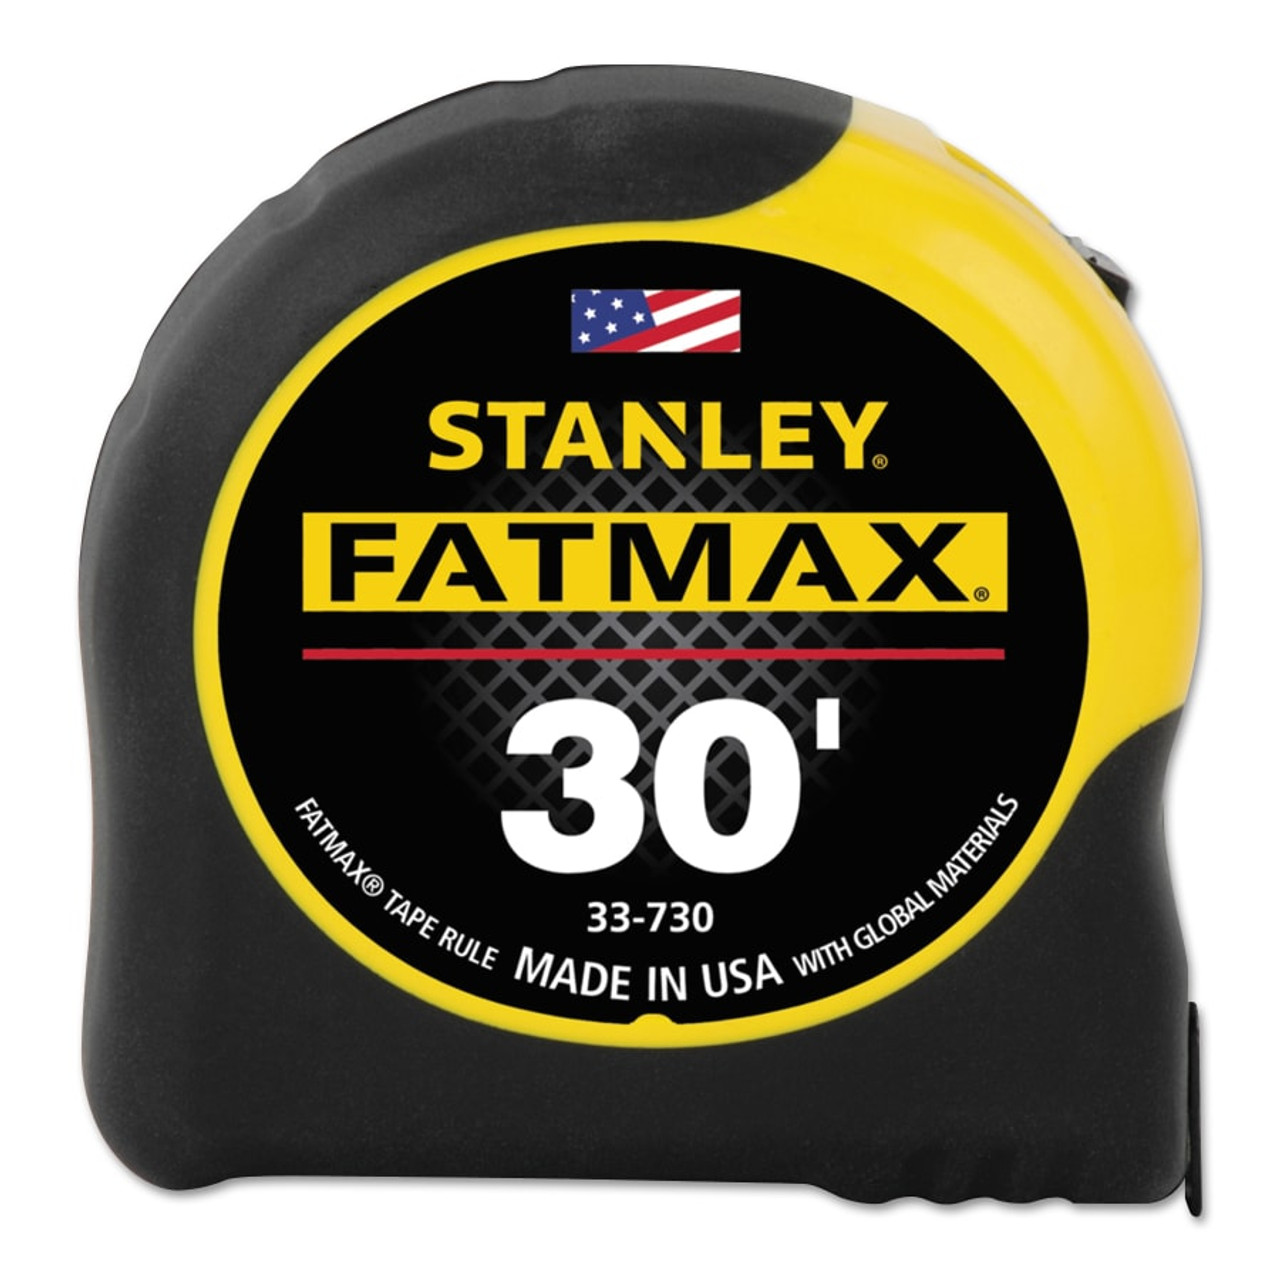 Stanley FatMax Classic Tape Measure, 1-1/4 in W x 30 ft L, SAE, Black/Yellow Case